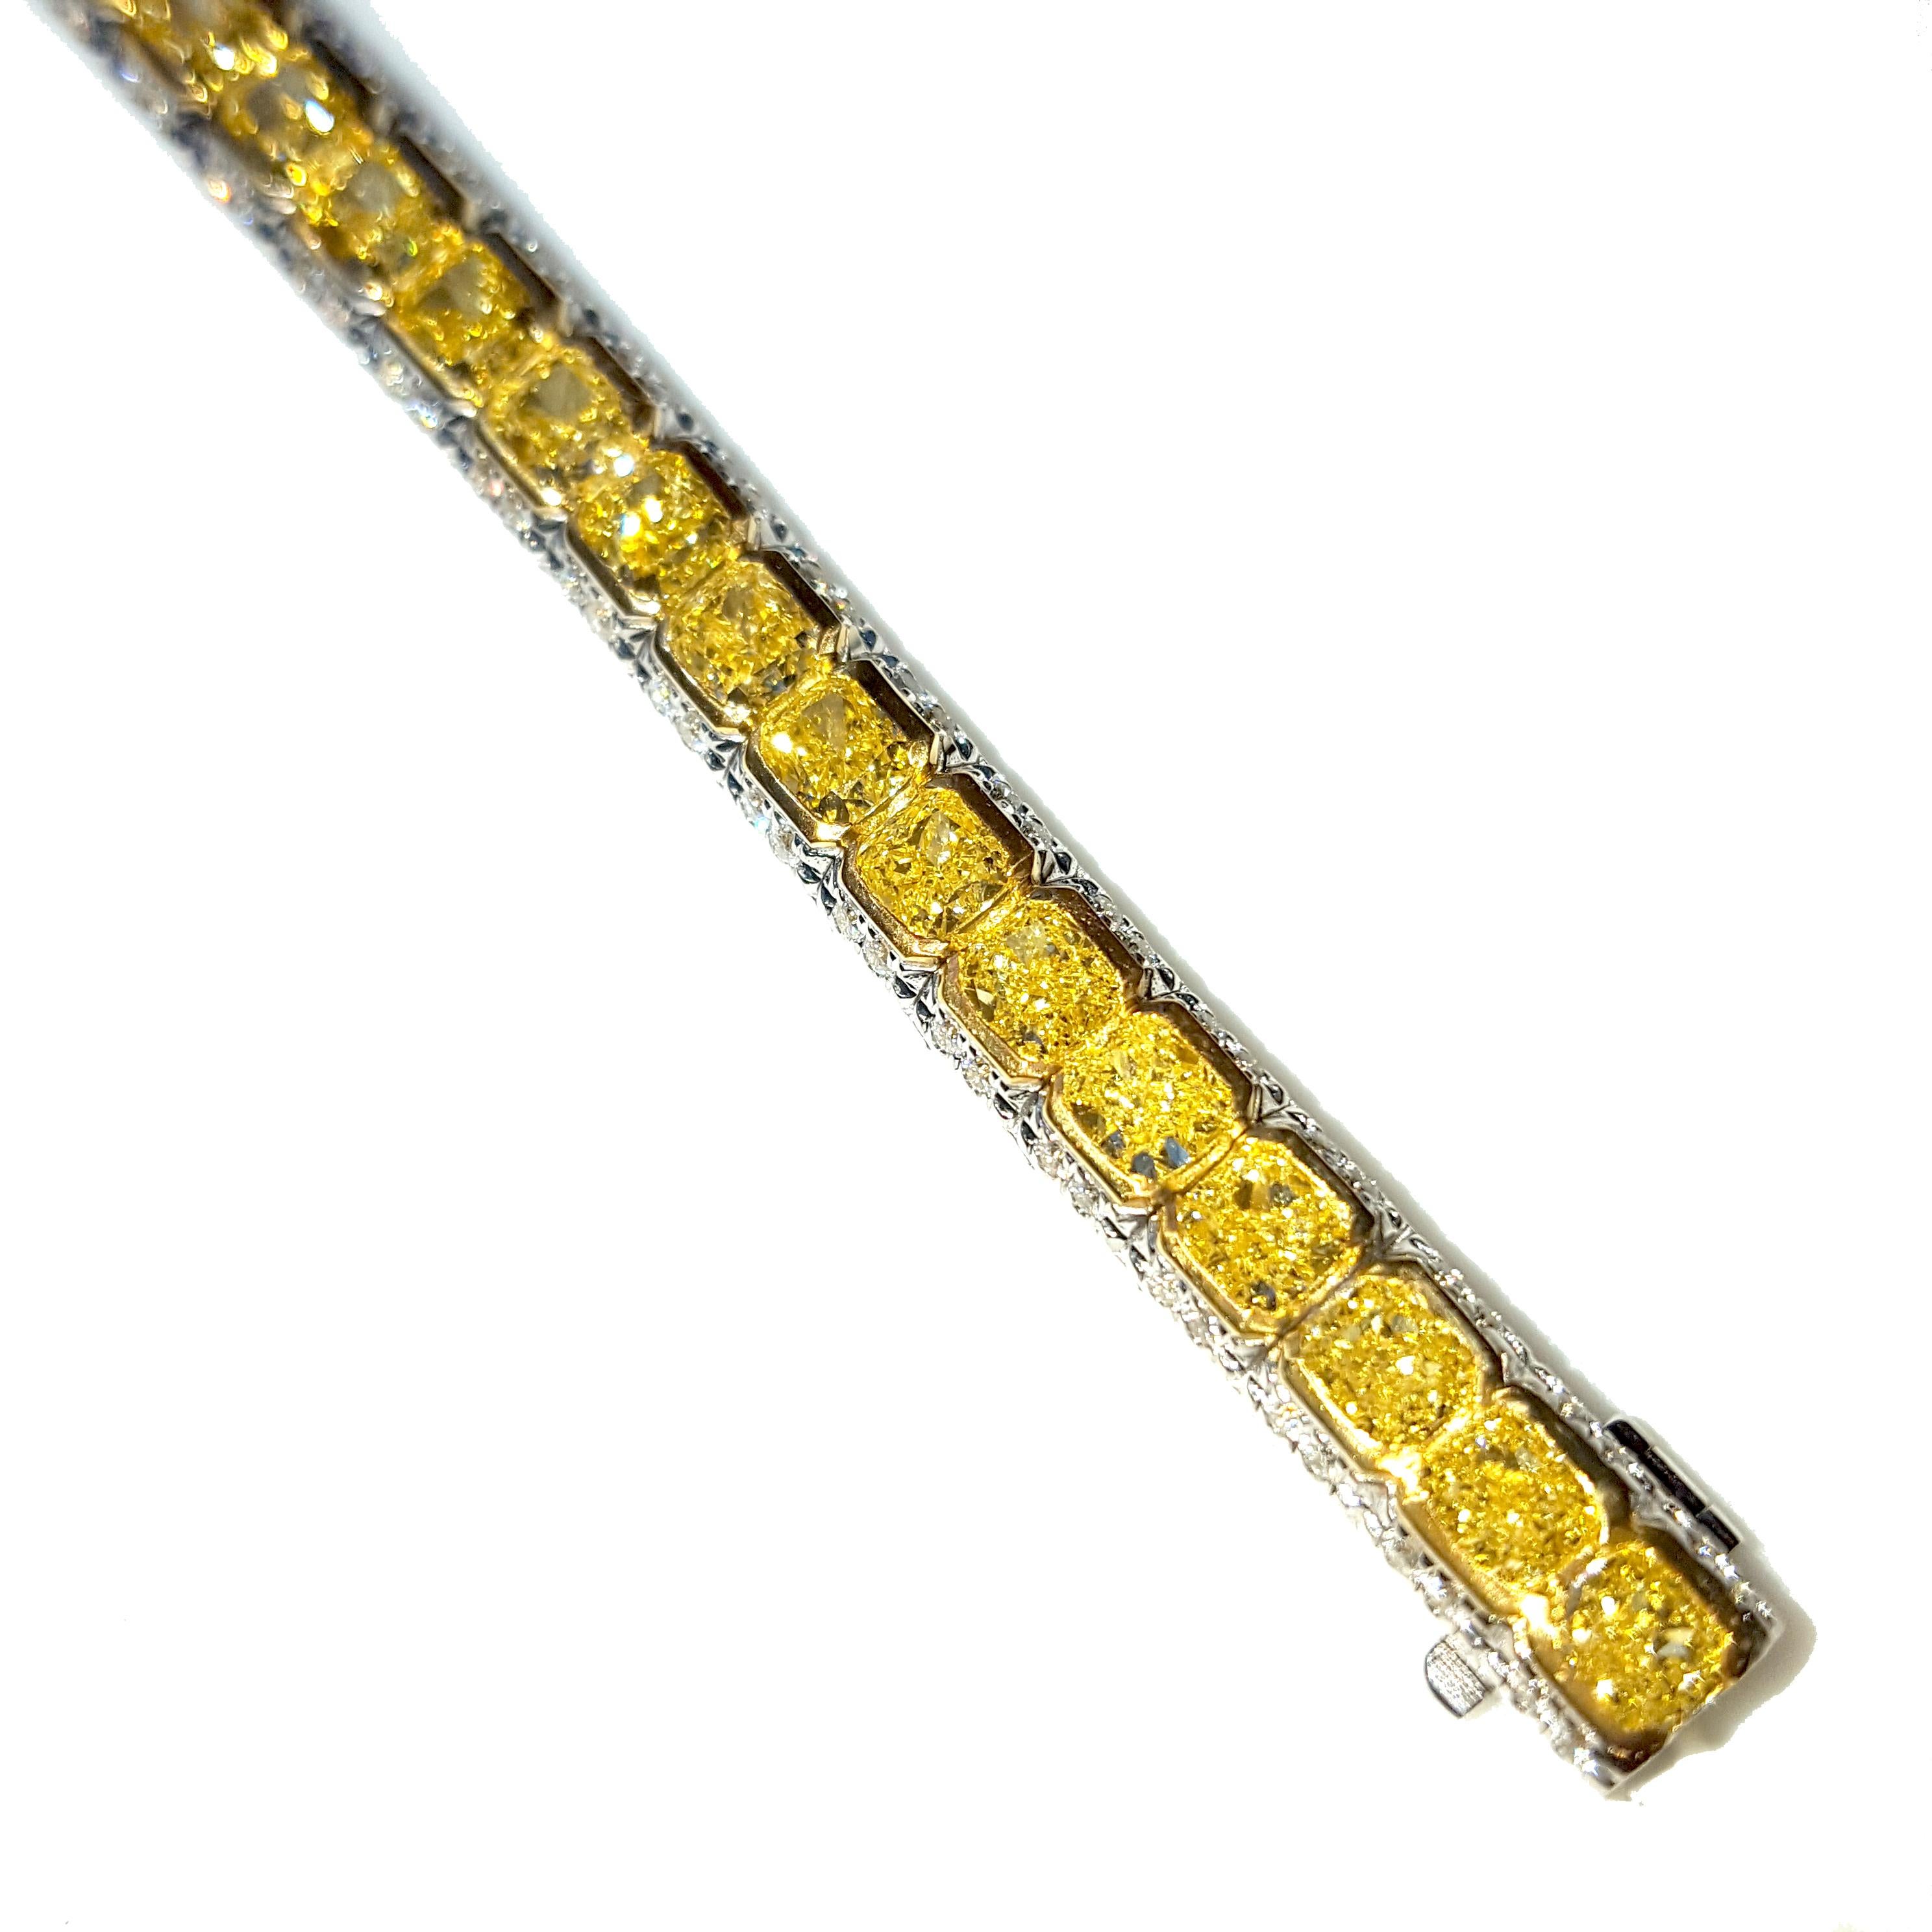 Just Under 13 Carat Yellow and White Diamond Bracelet 18k White And Yellow Gold. For Sale 1